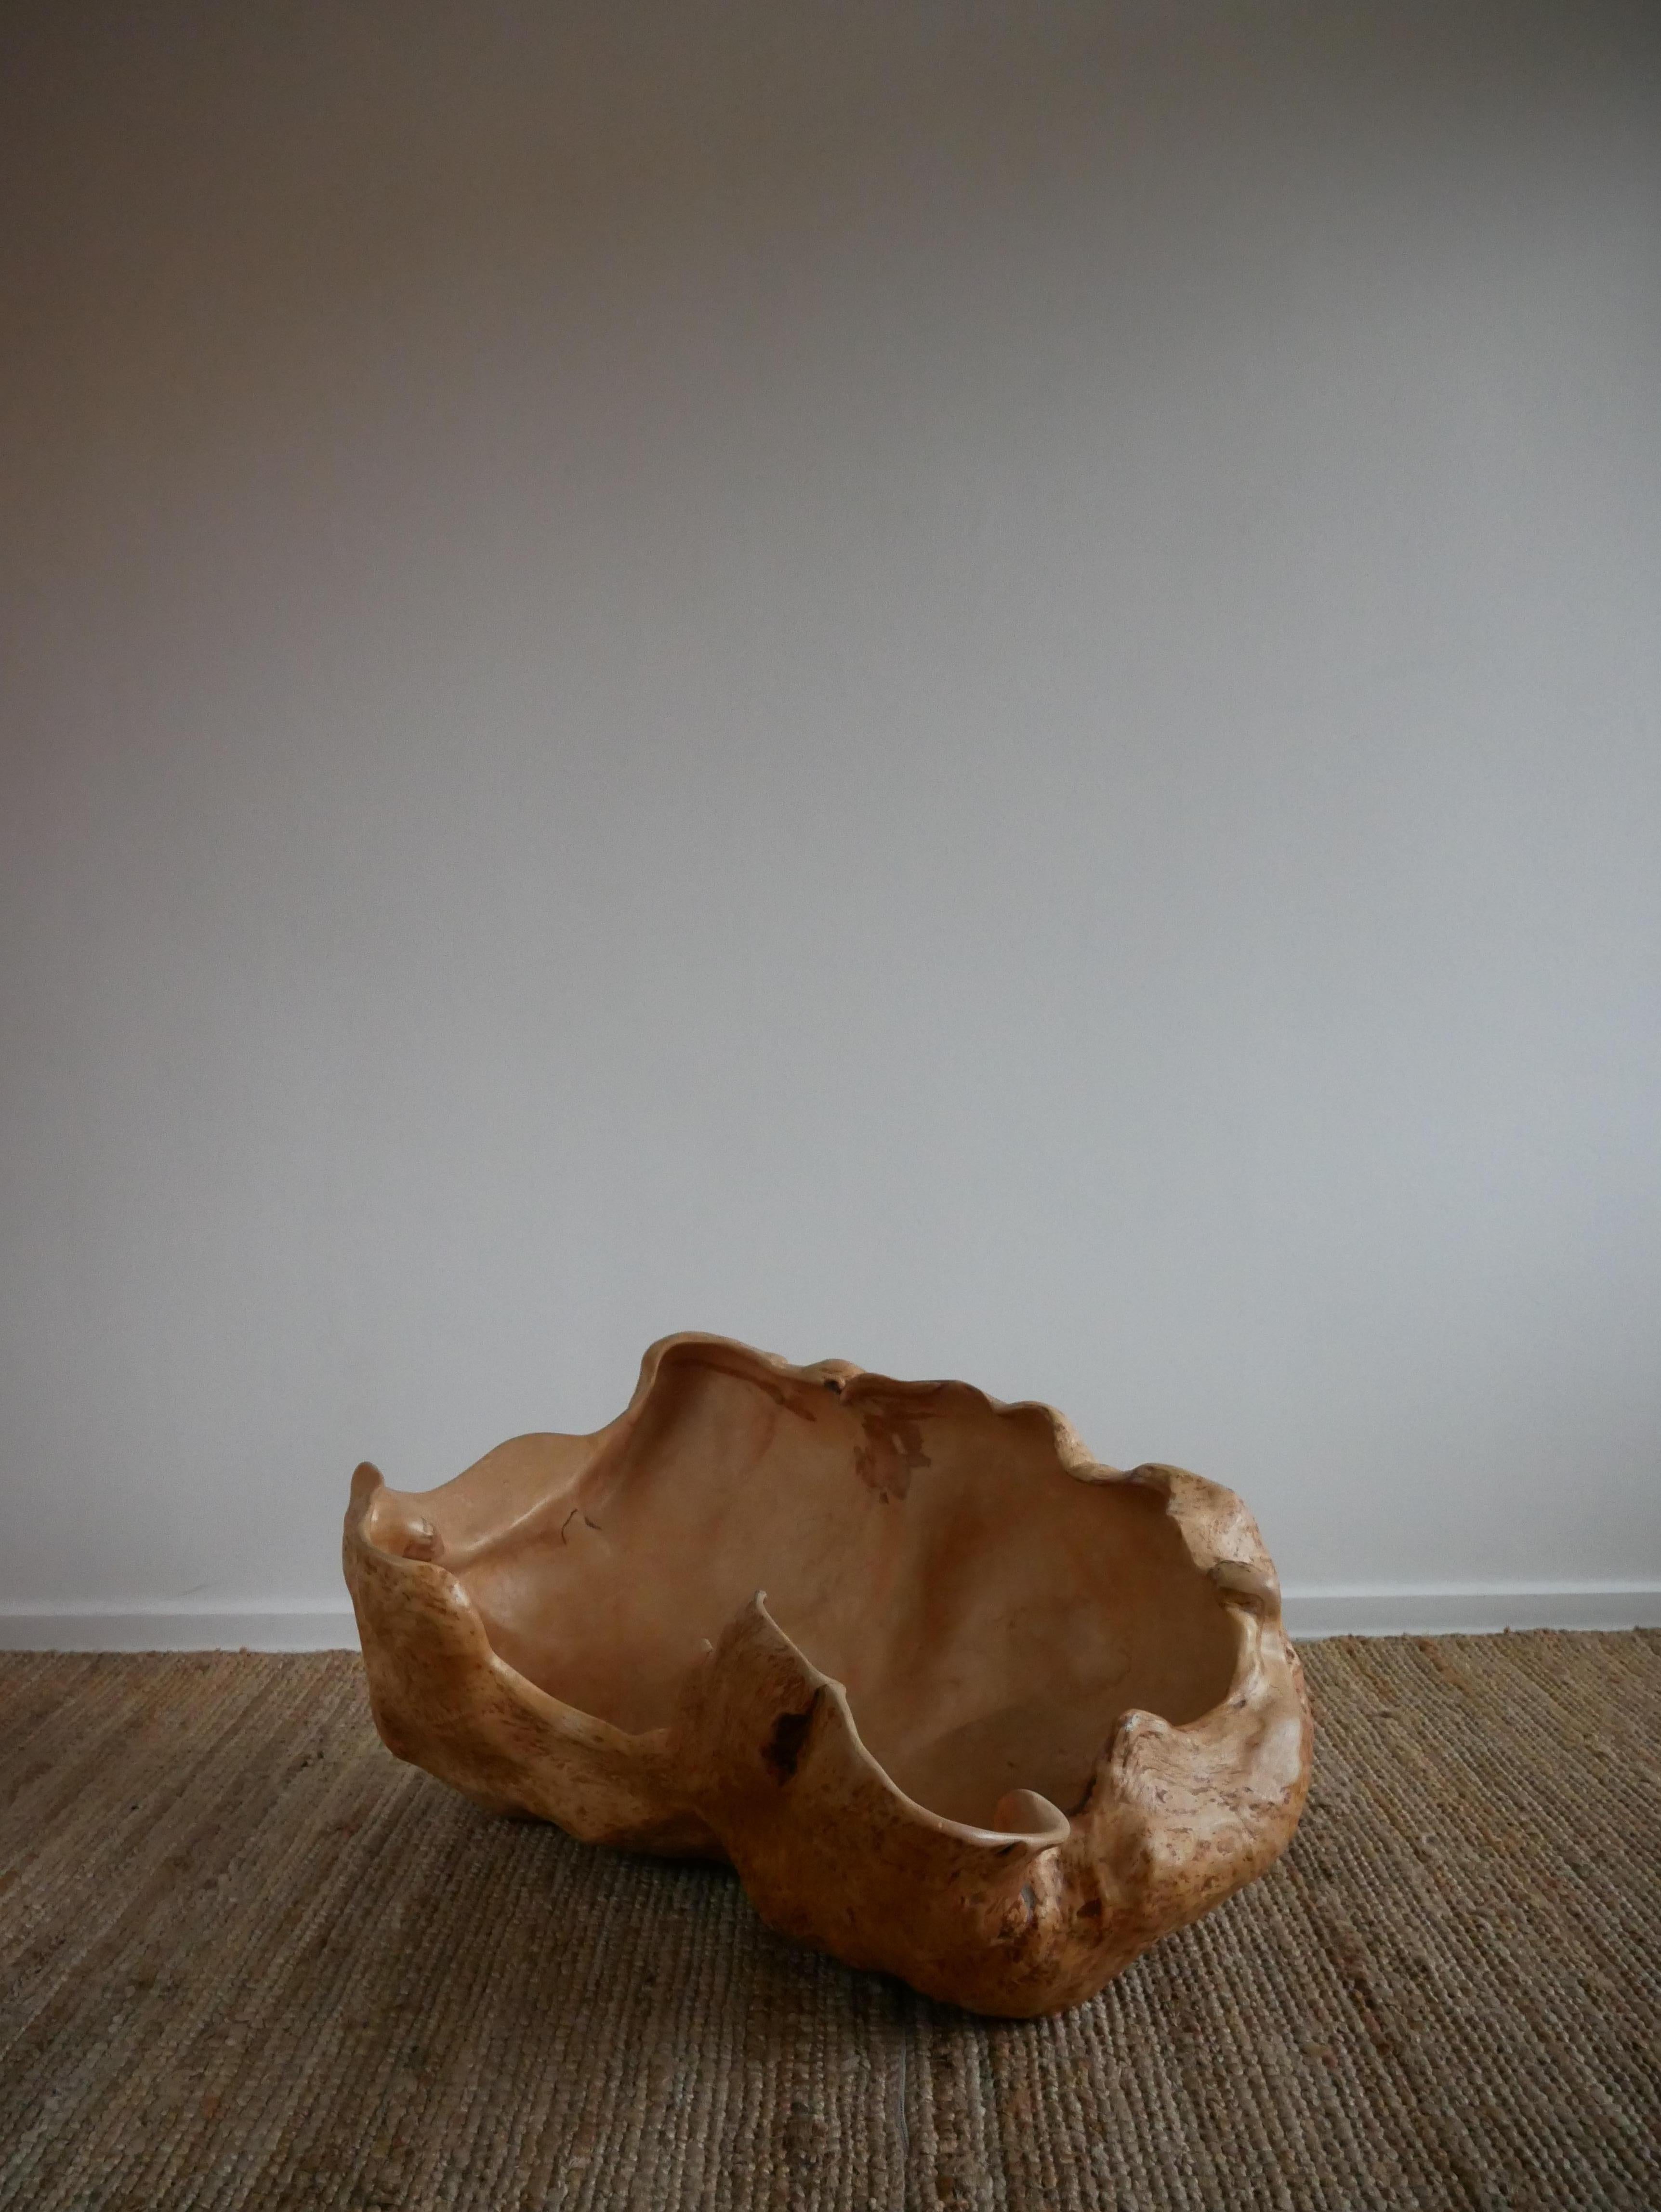 Truly massive primitive root bowl
From Sweden, made out of burl birch in 1970.